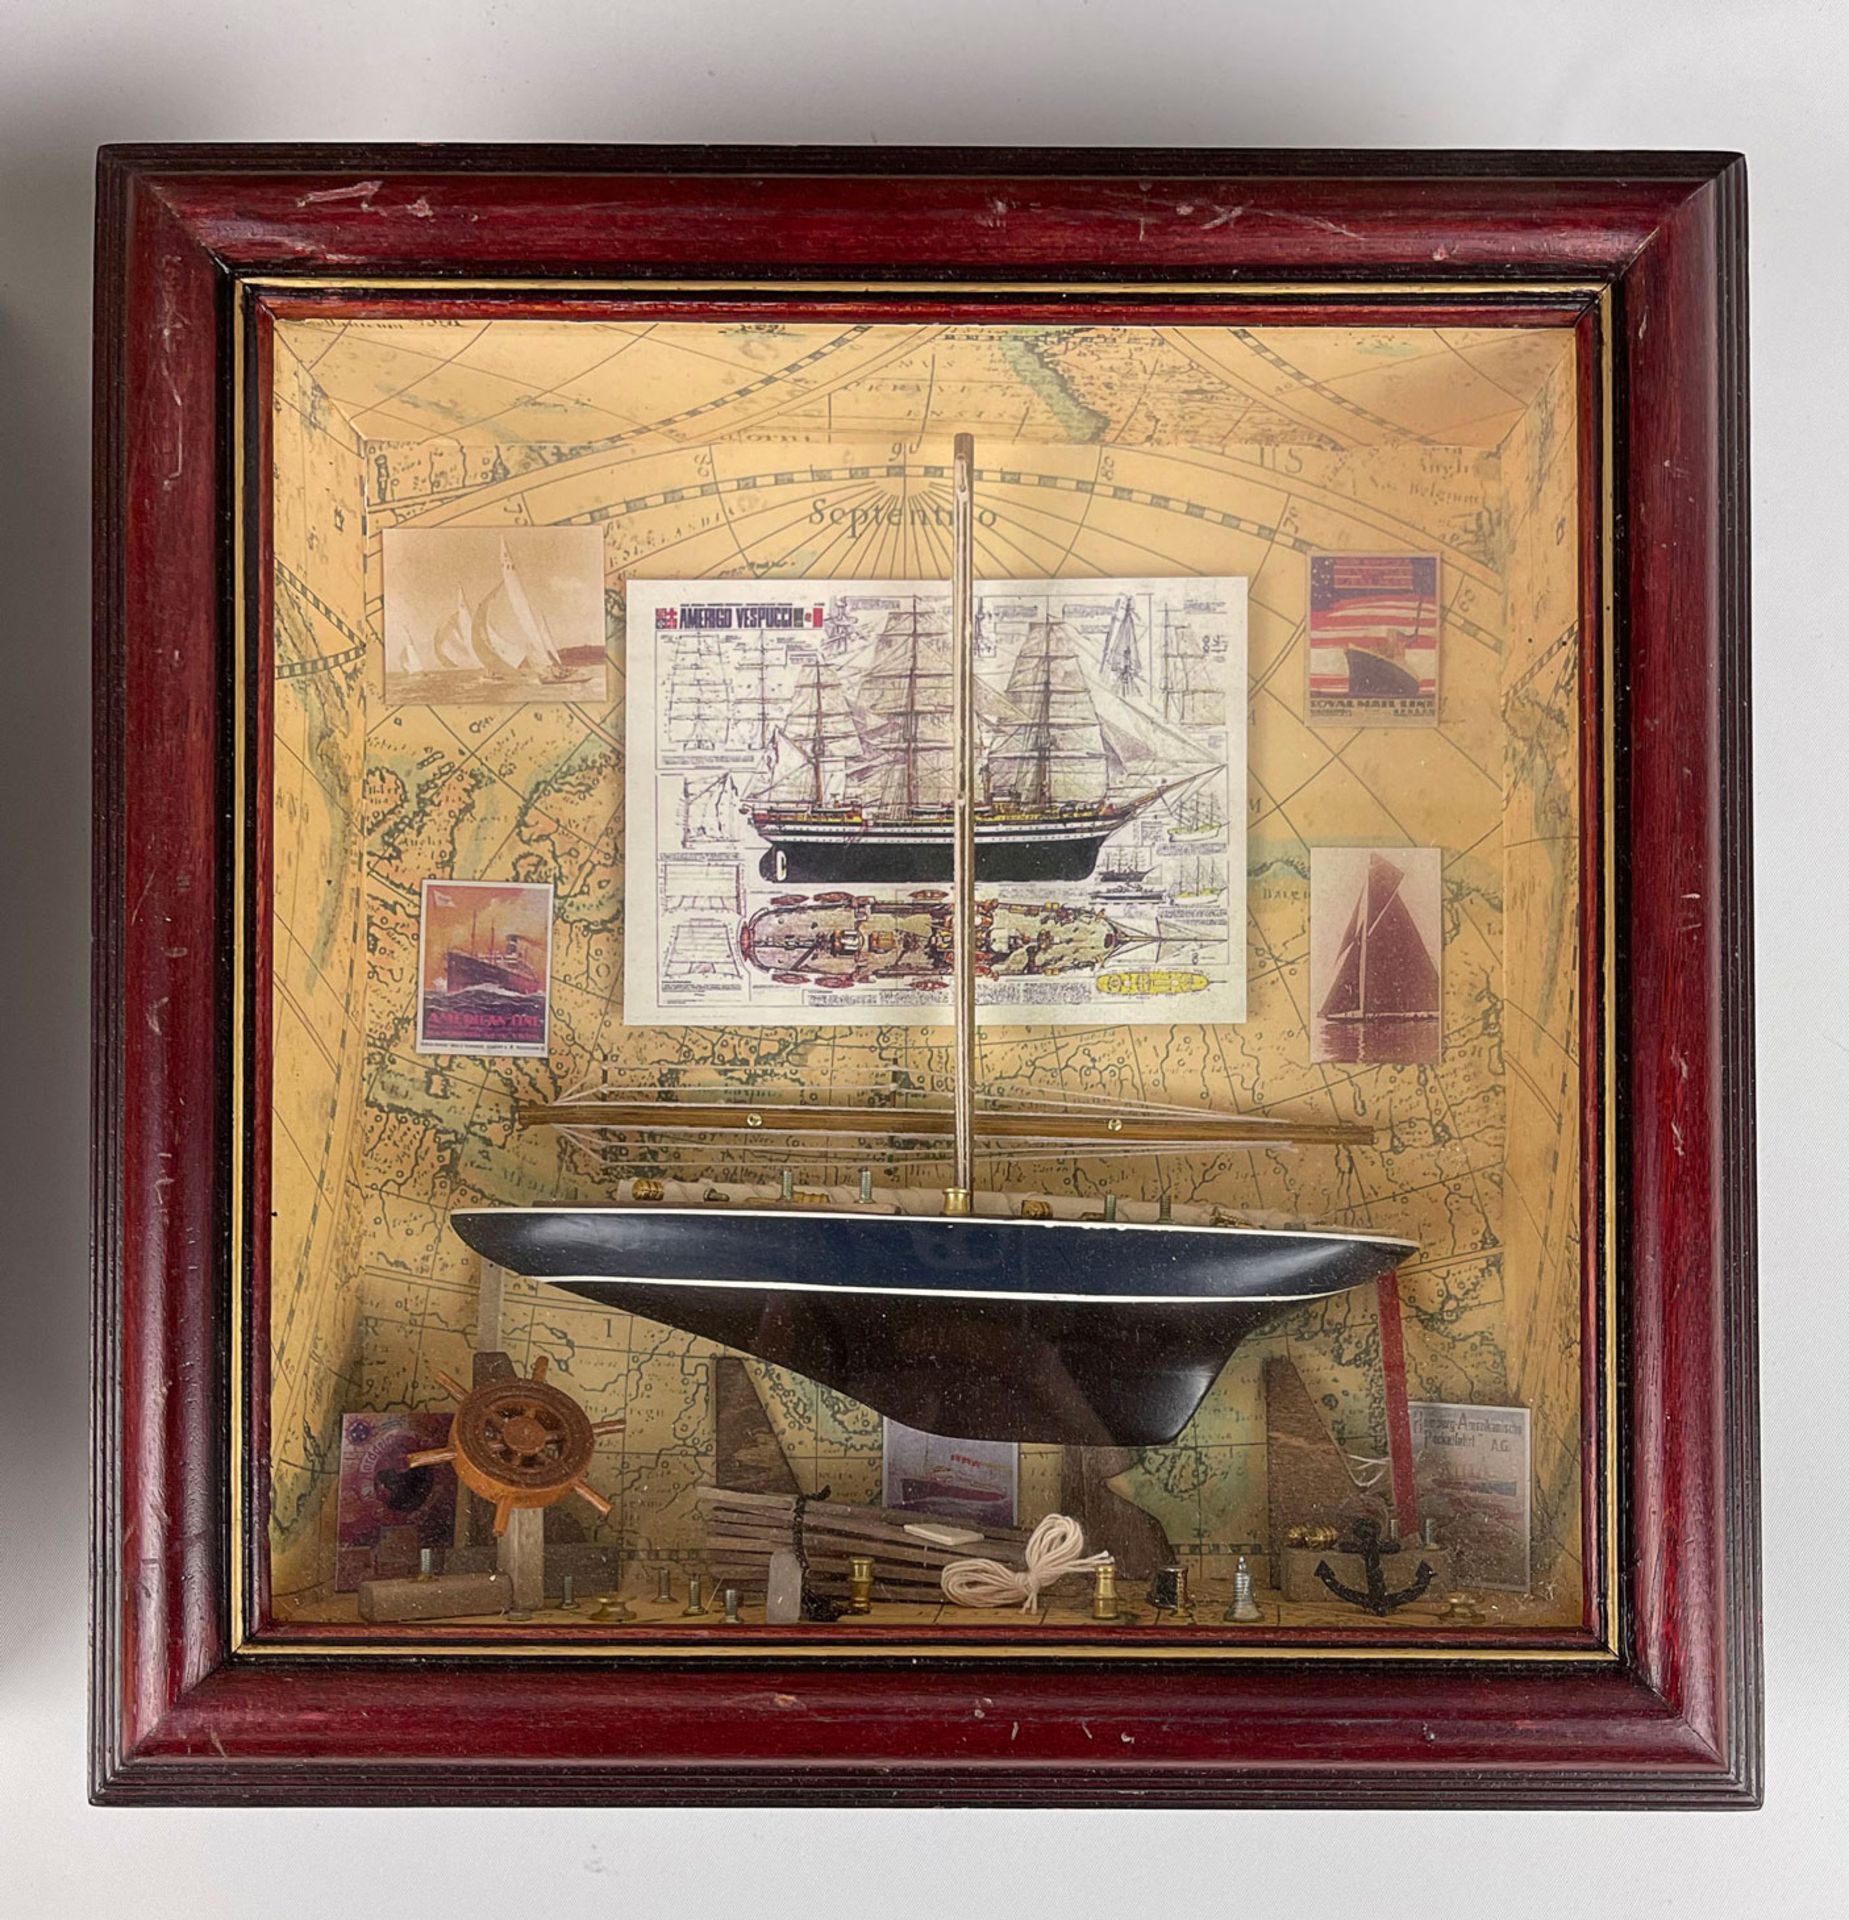 Set of 3 framed ship knots and boats - Image 2 of 4